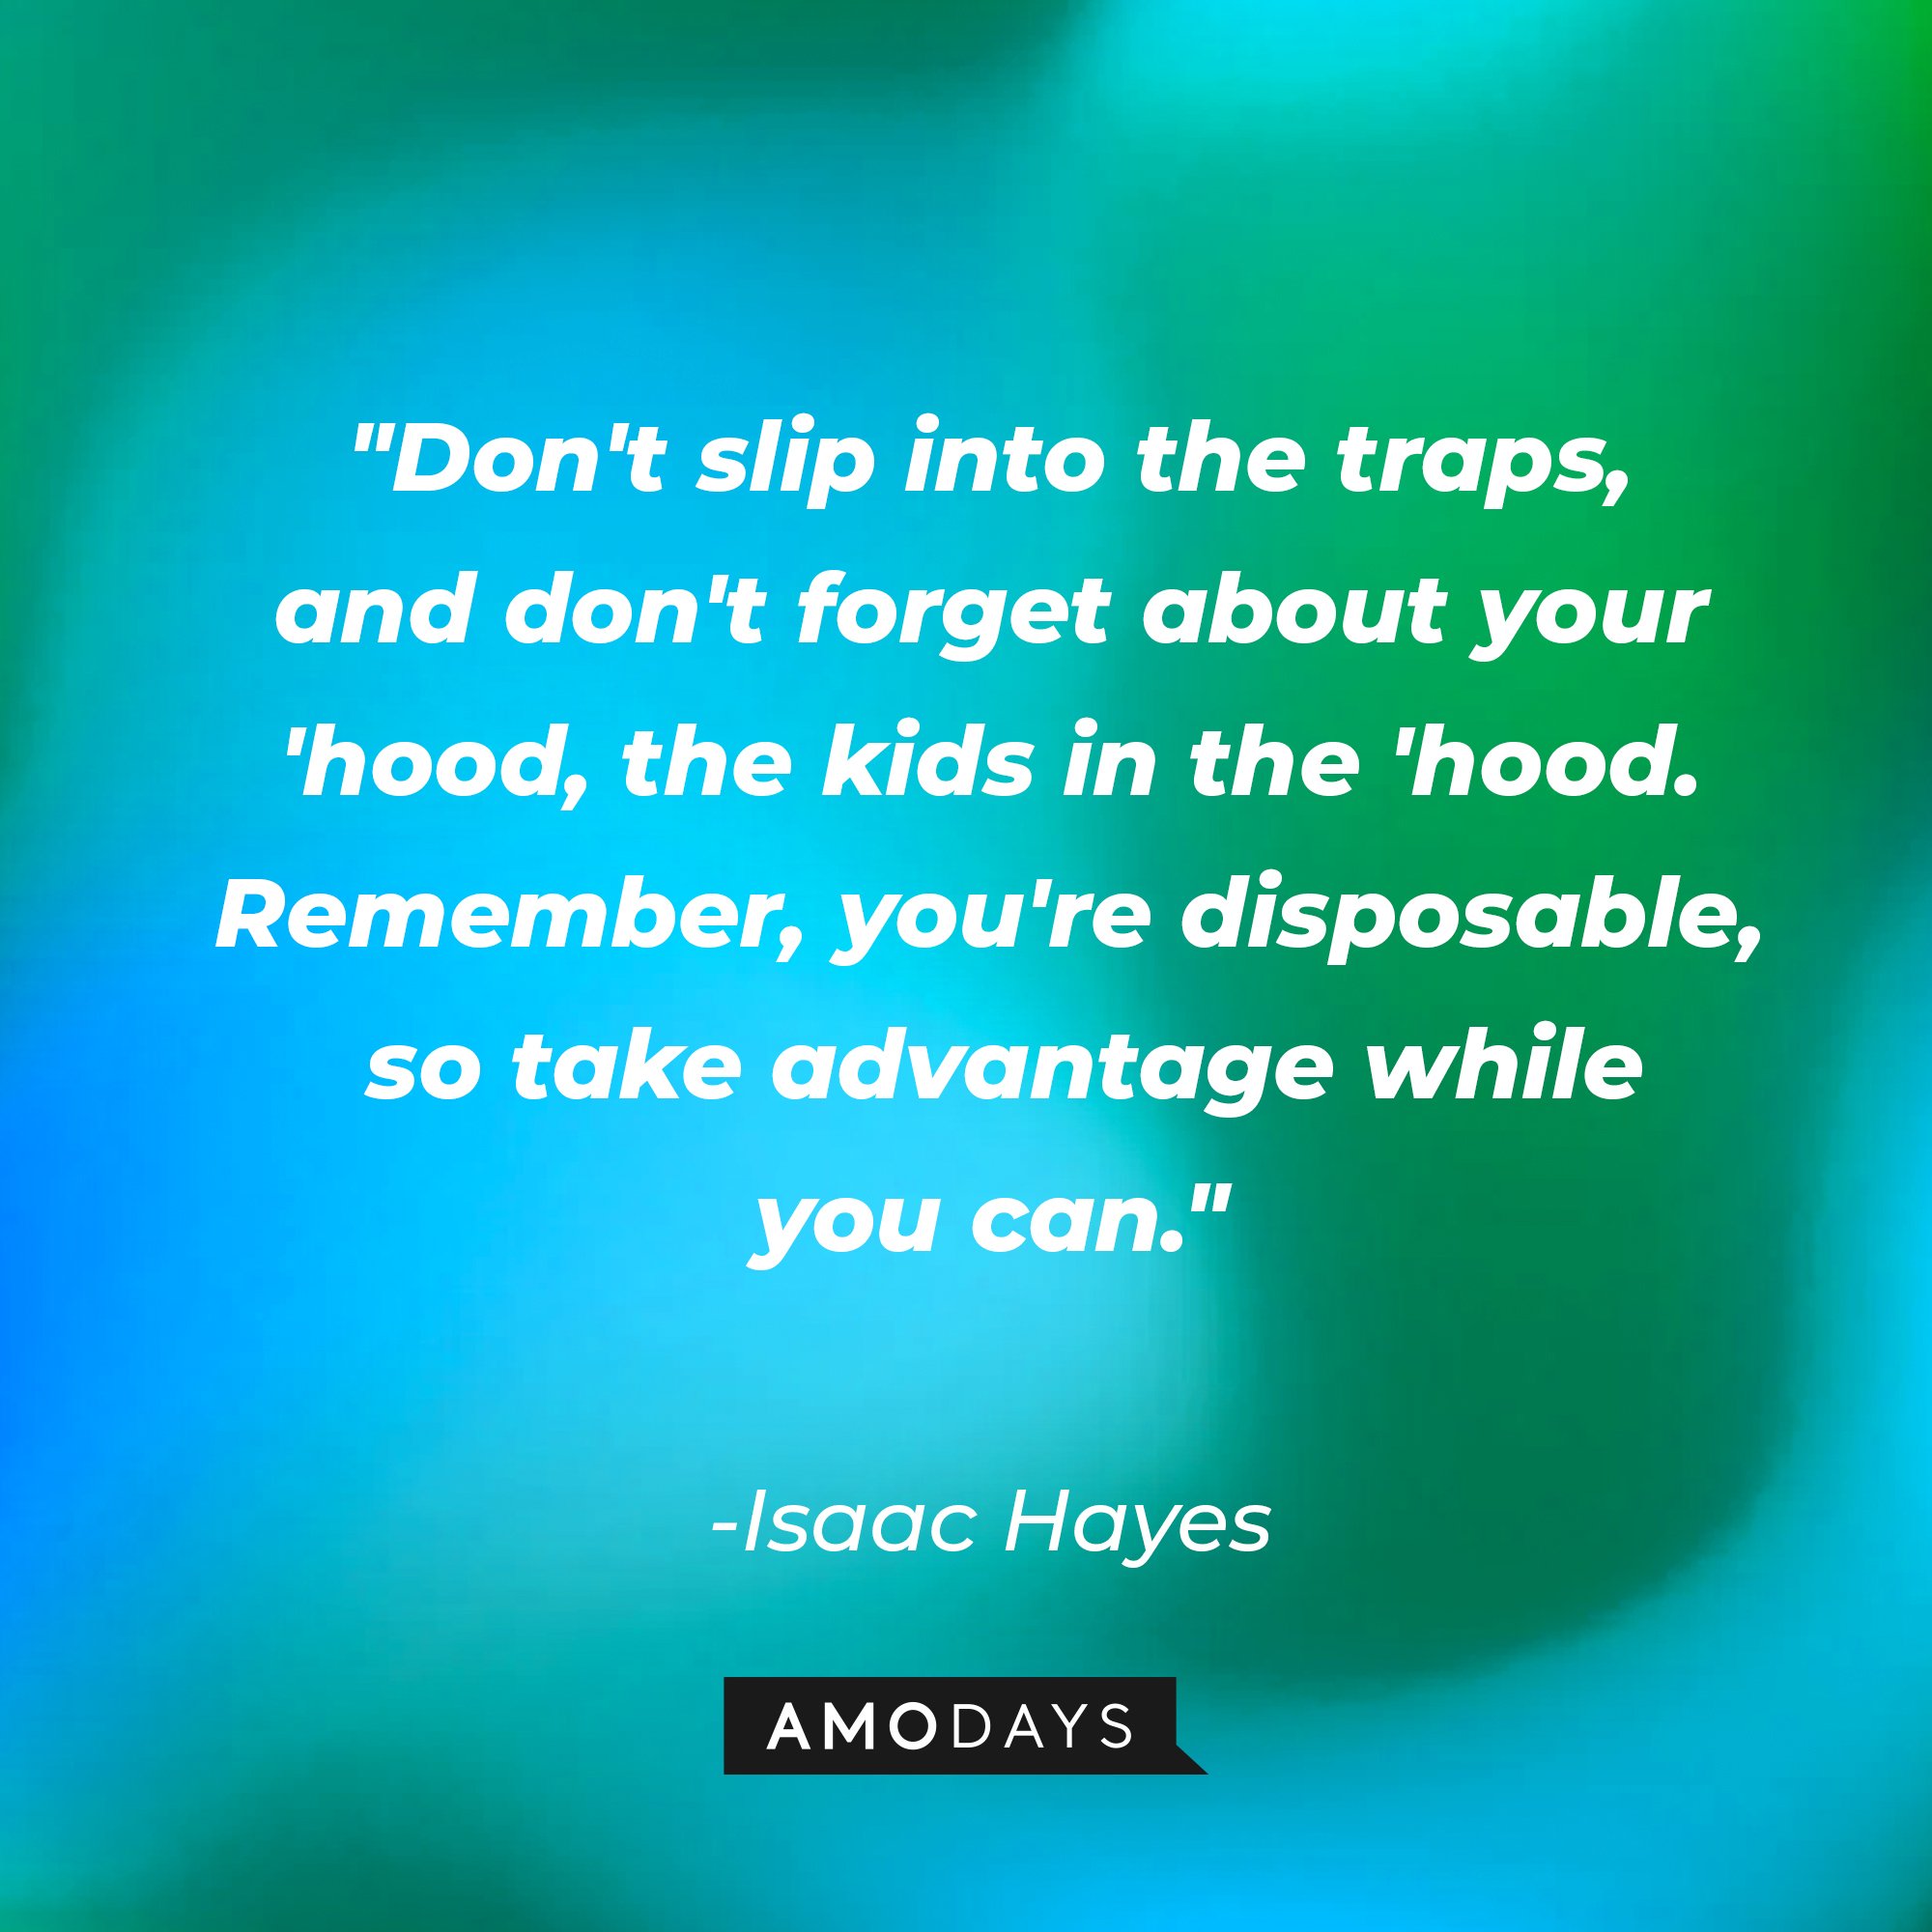 Isaac Hayes' quote: "Don't slip into the traps, and don't forget about your 'hood, the kids in the 'hood. Remember, you're disposable, so take advantage while you can." | Image: AmoDays